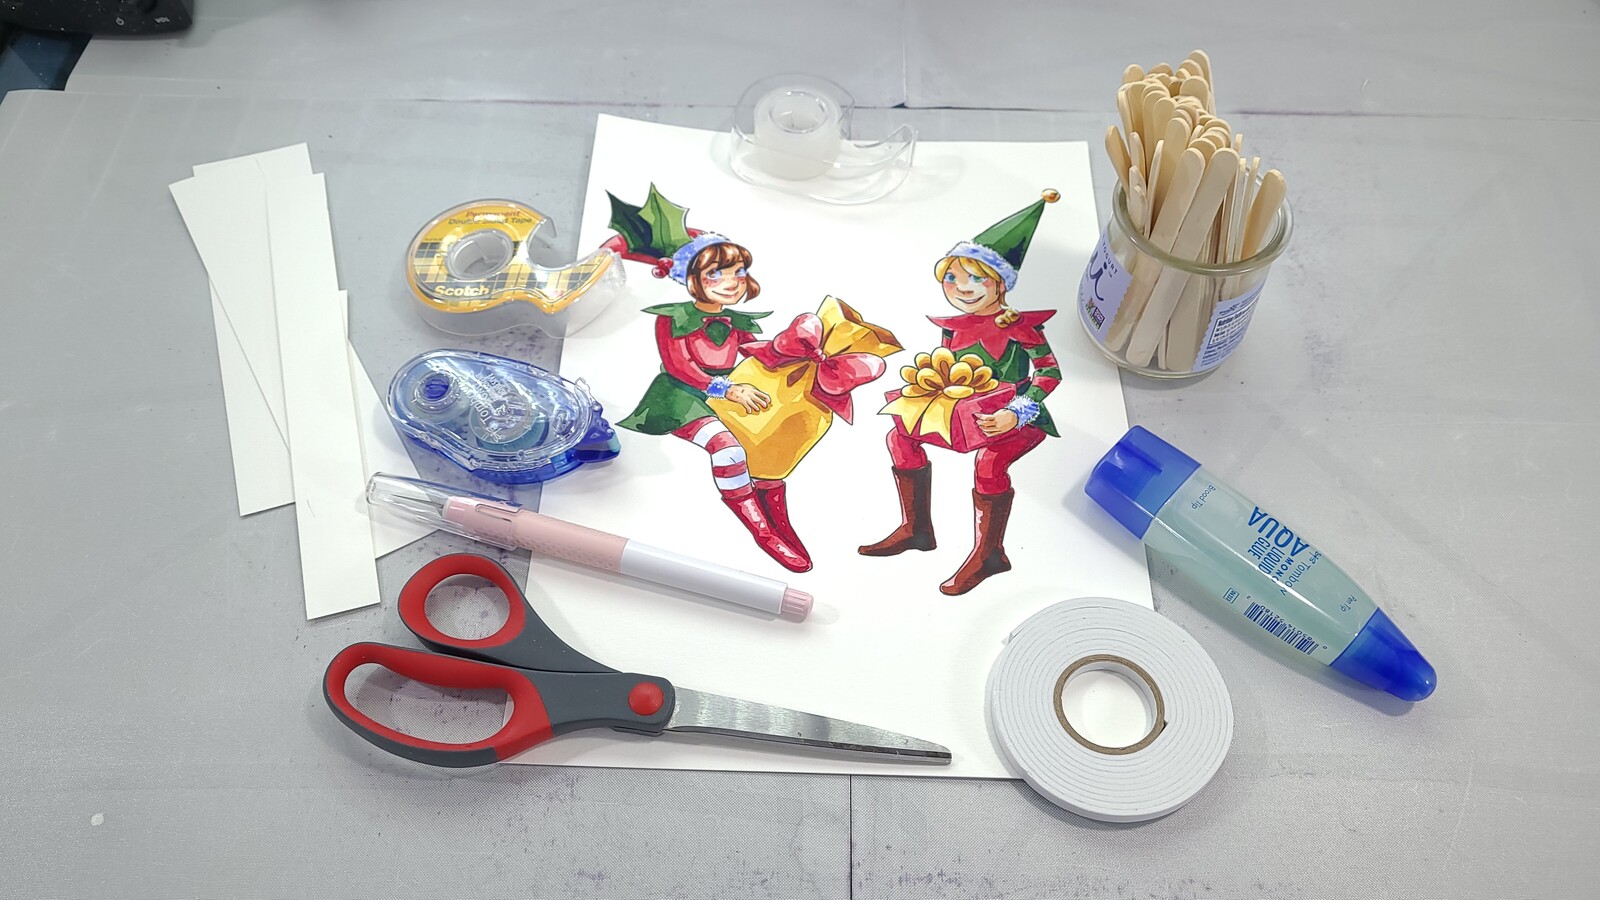 Papercraftmas Day 2: Shelf Sitters- with materials used for assembly